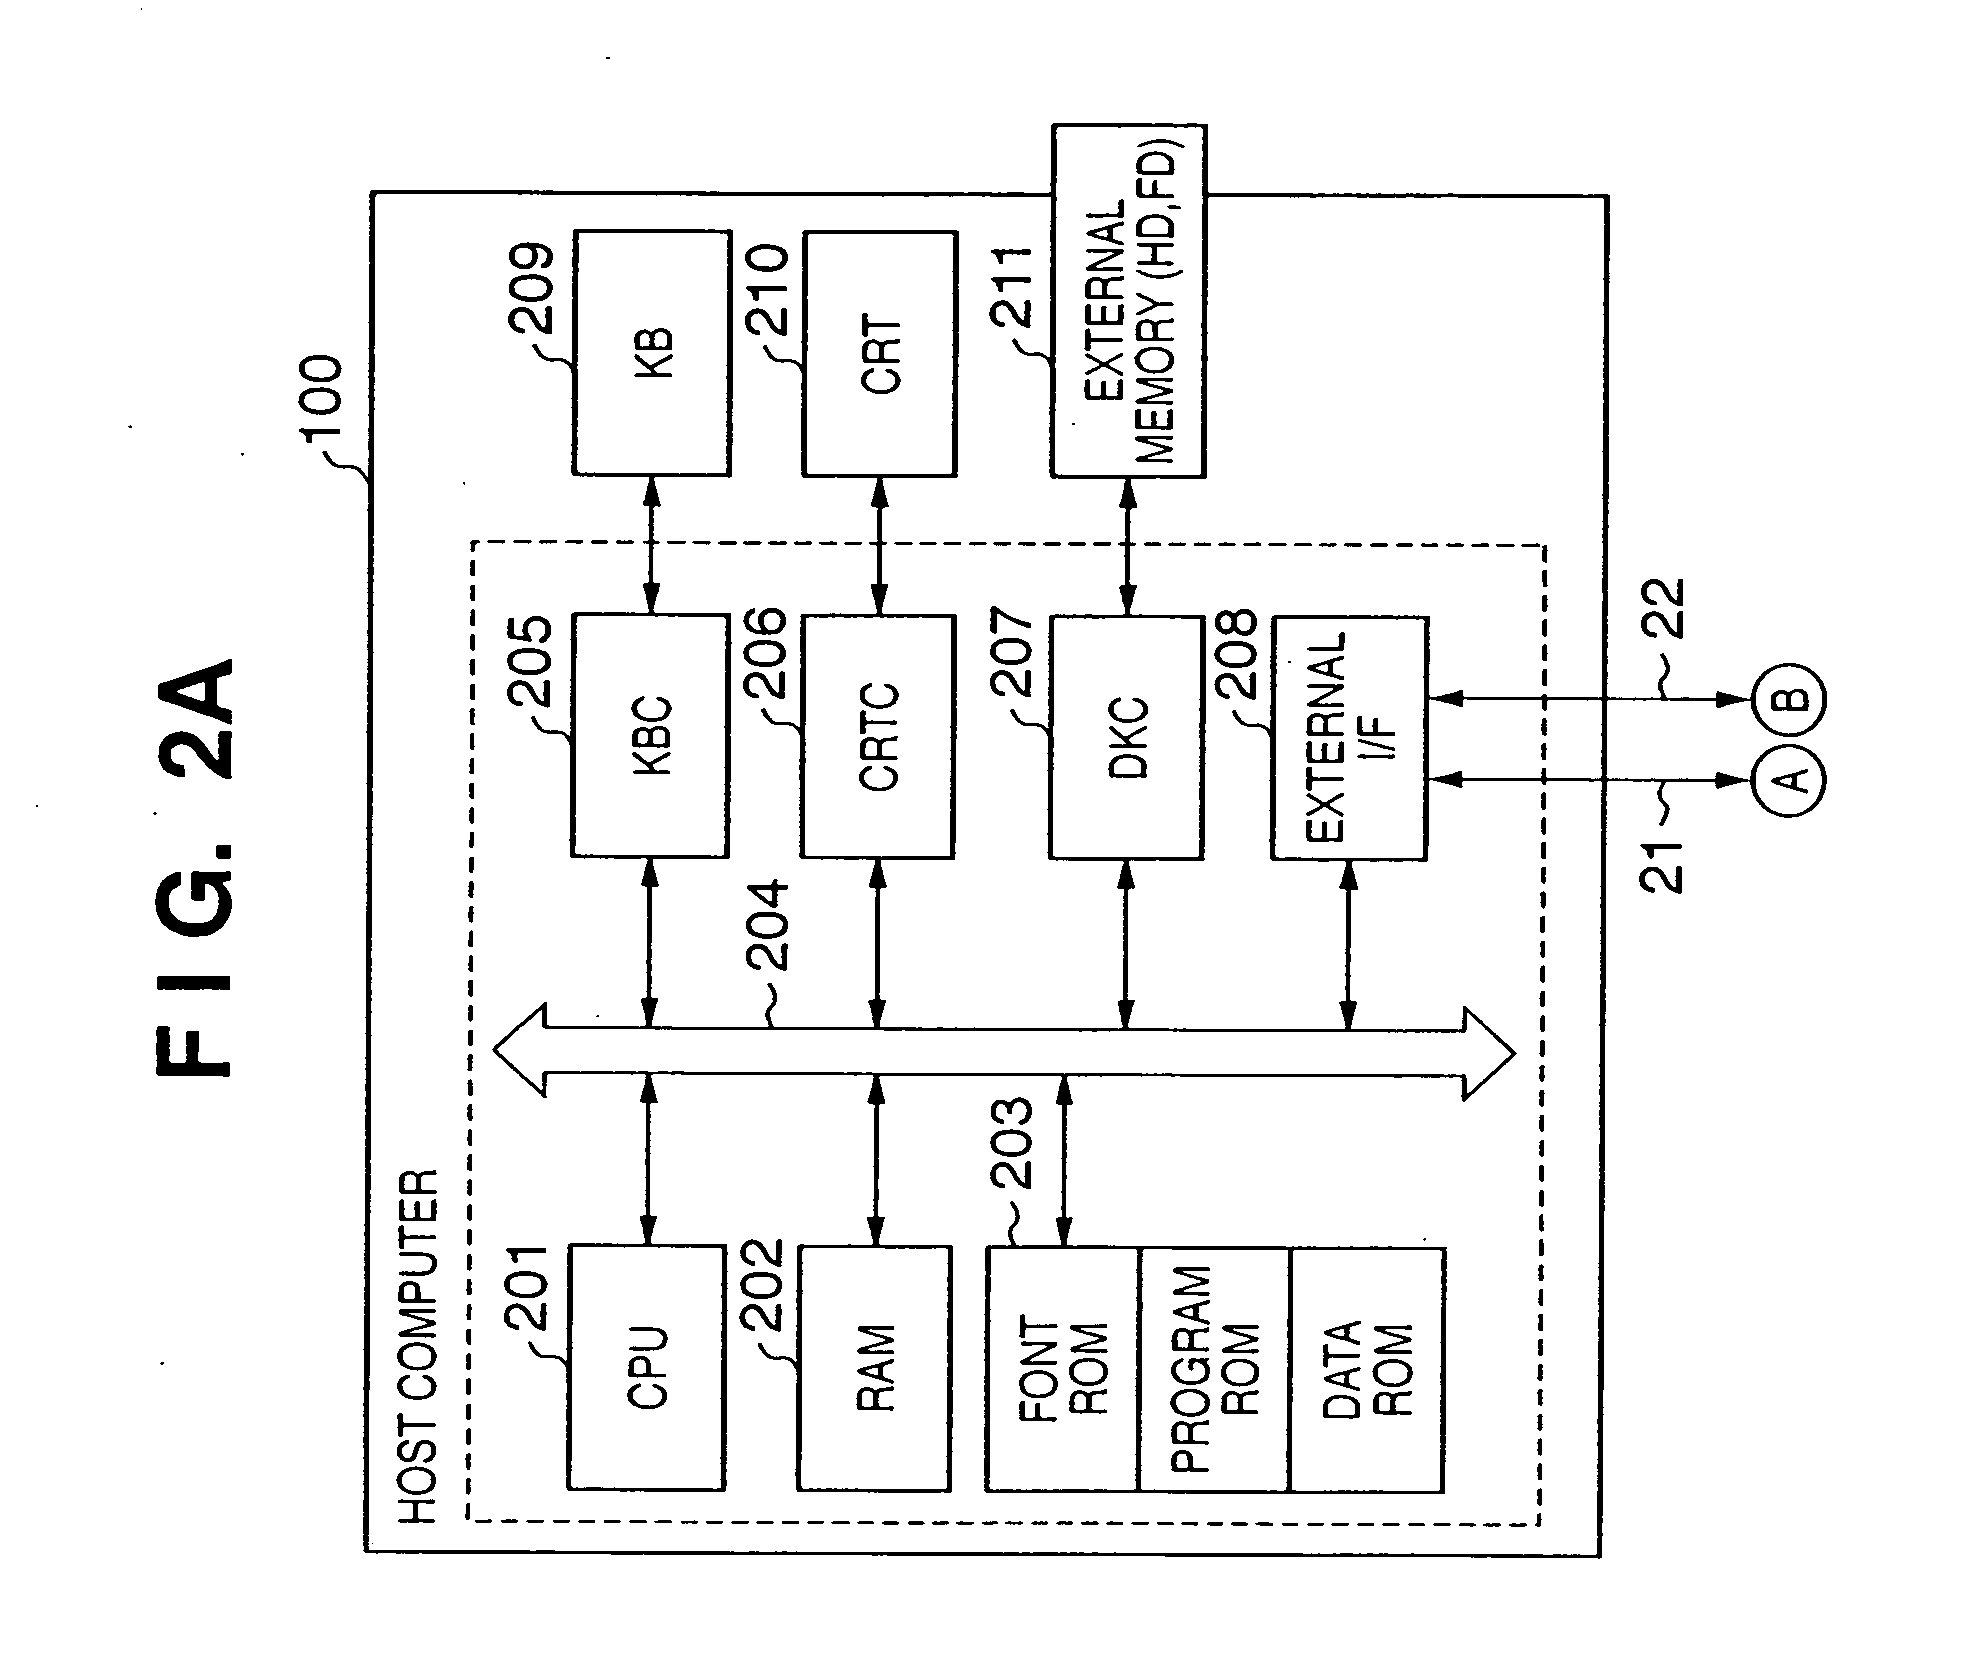 Document processing method and apparatus